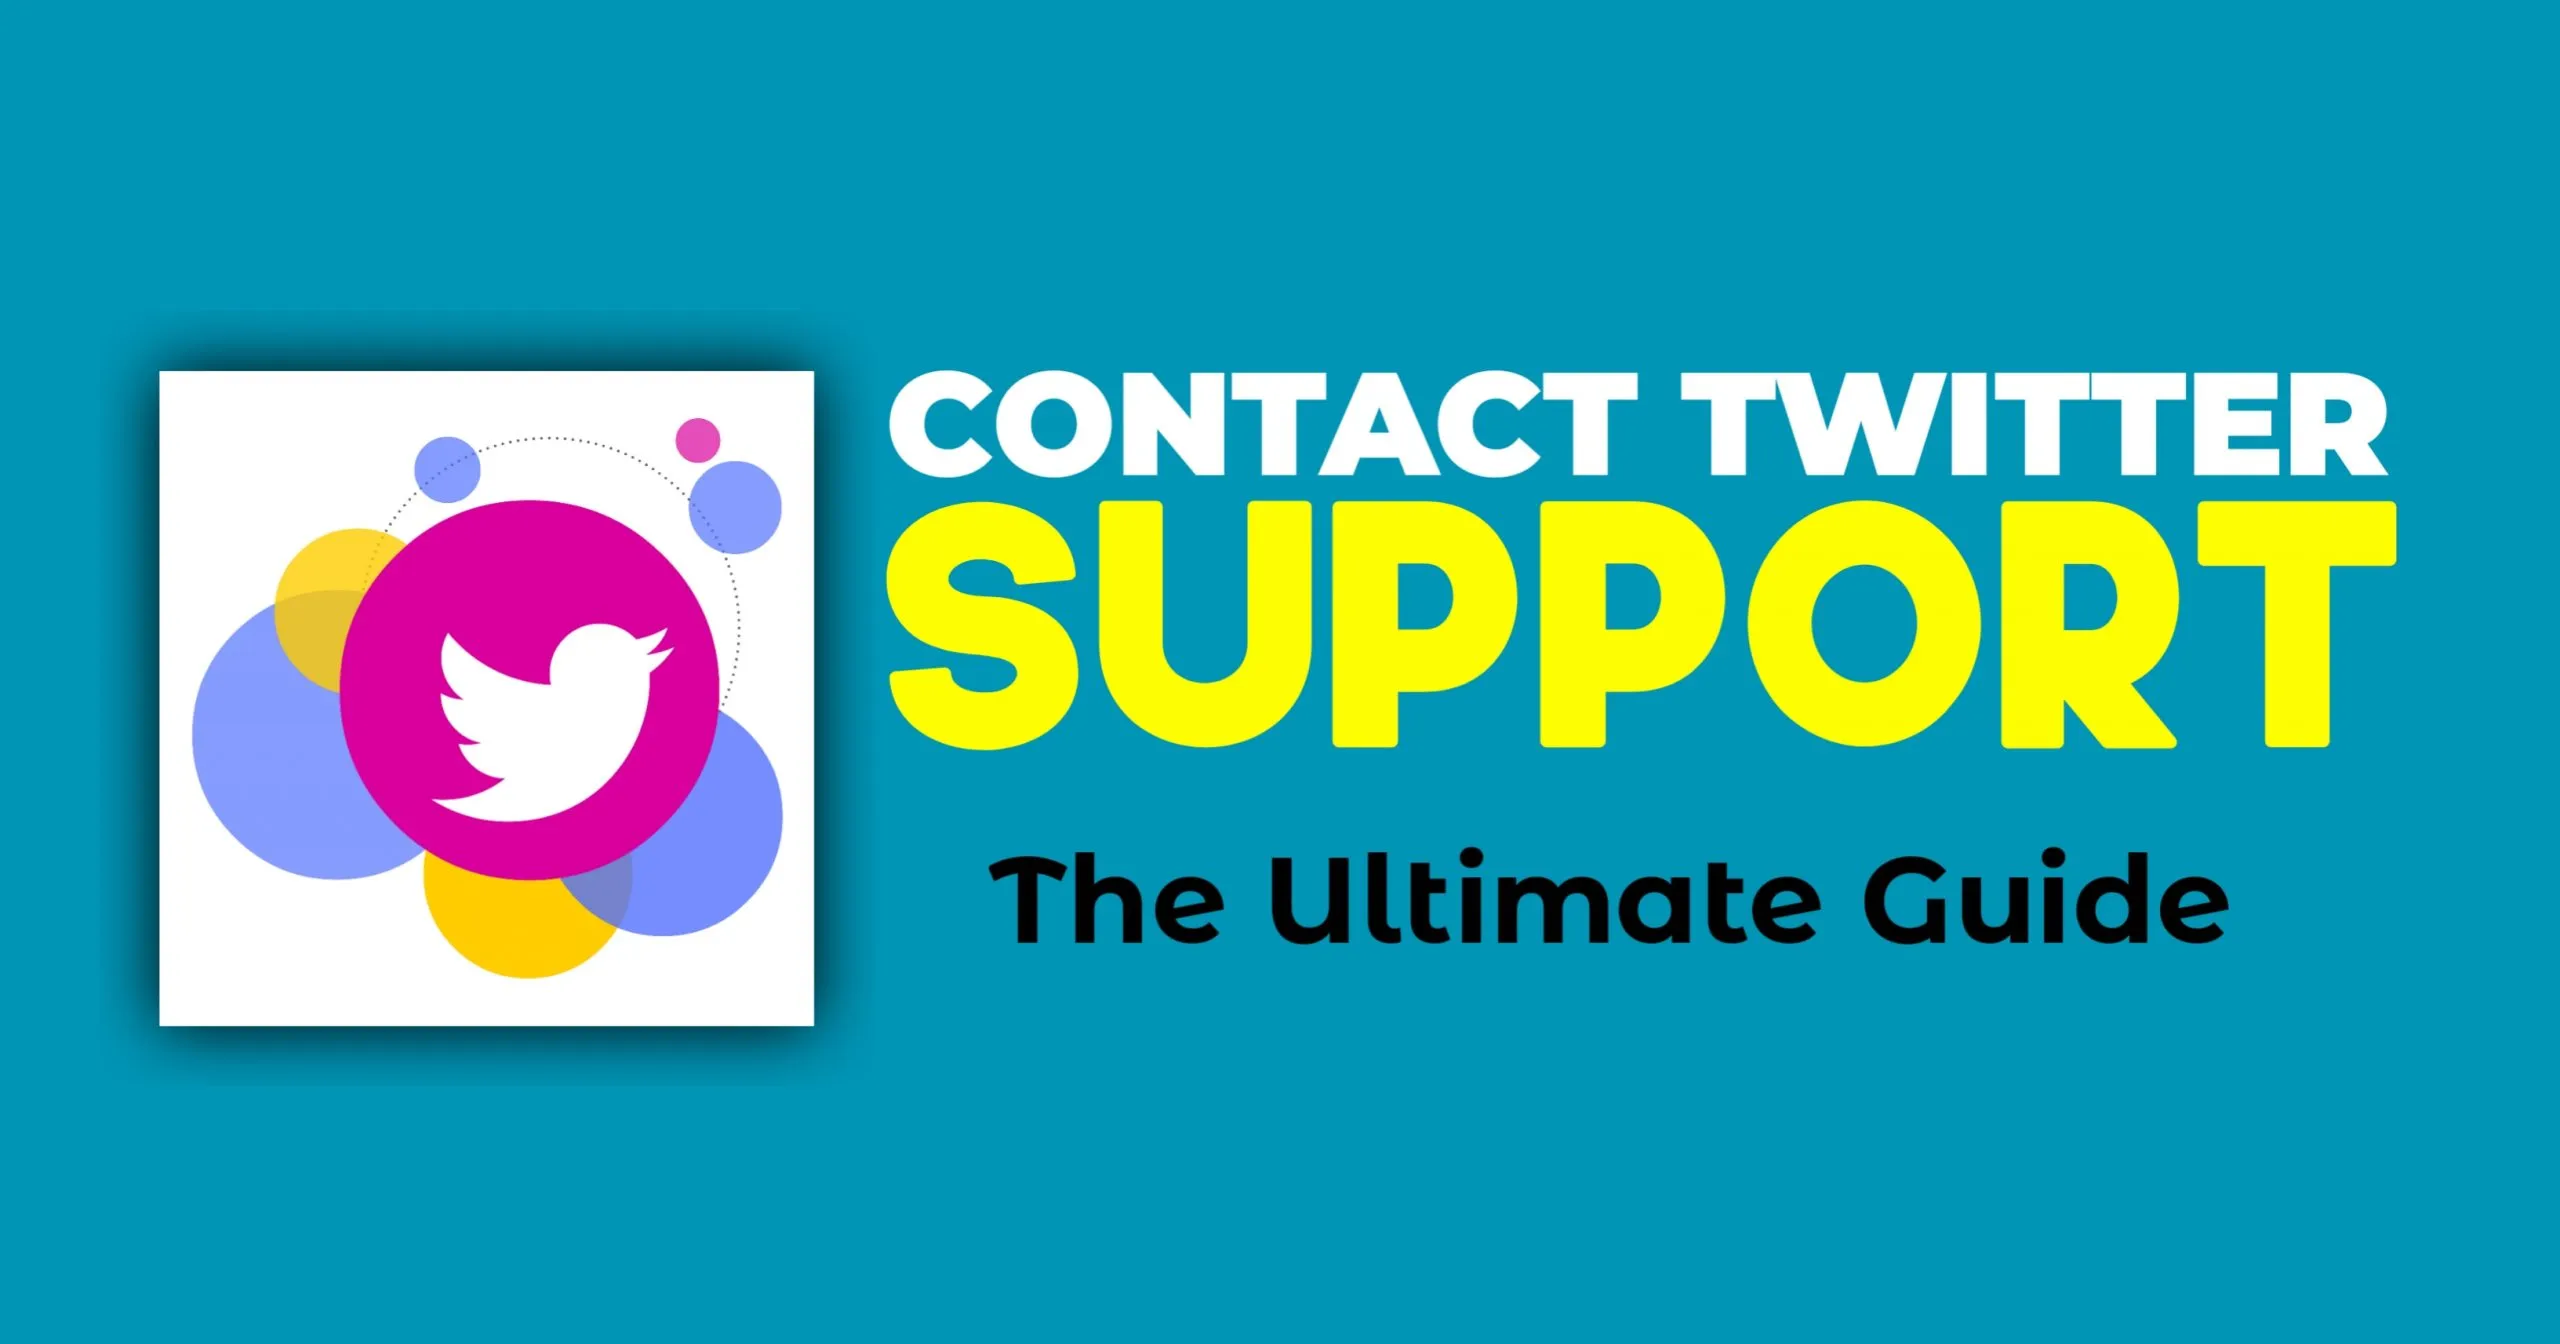 How To Contact Twitter Support On Email